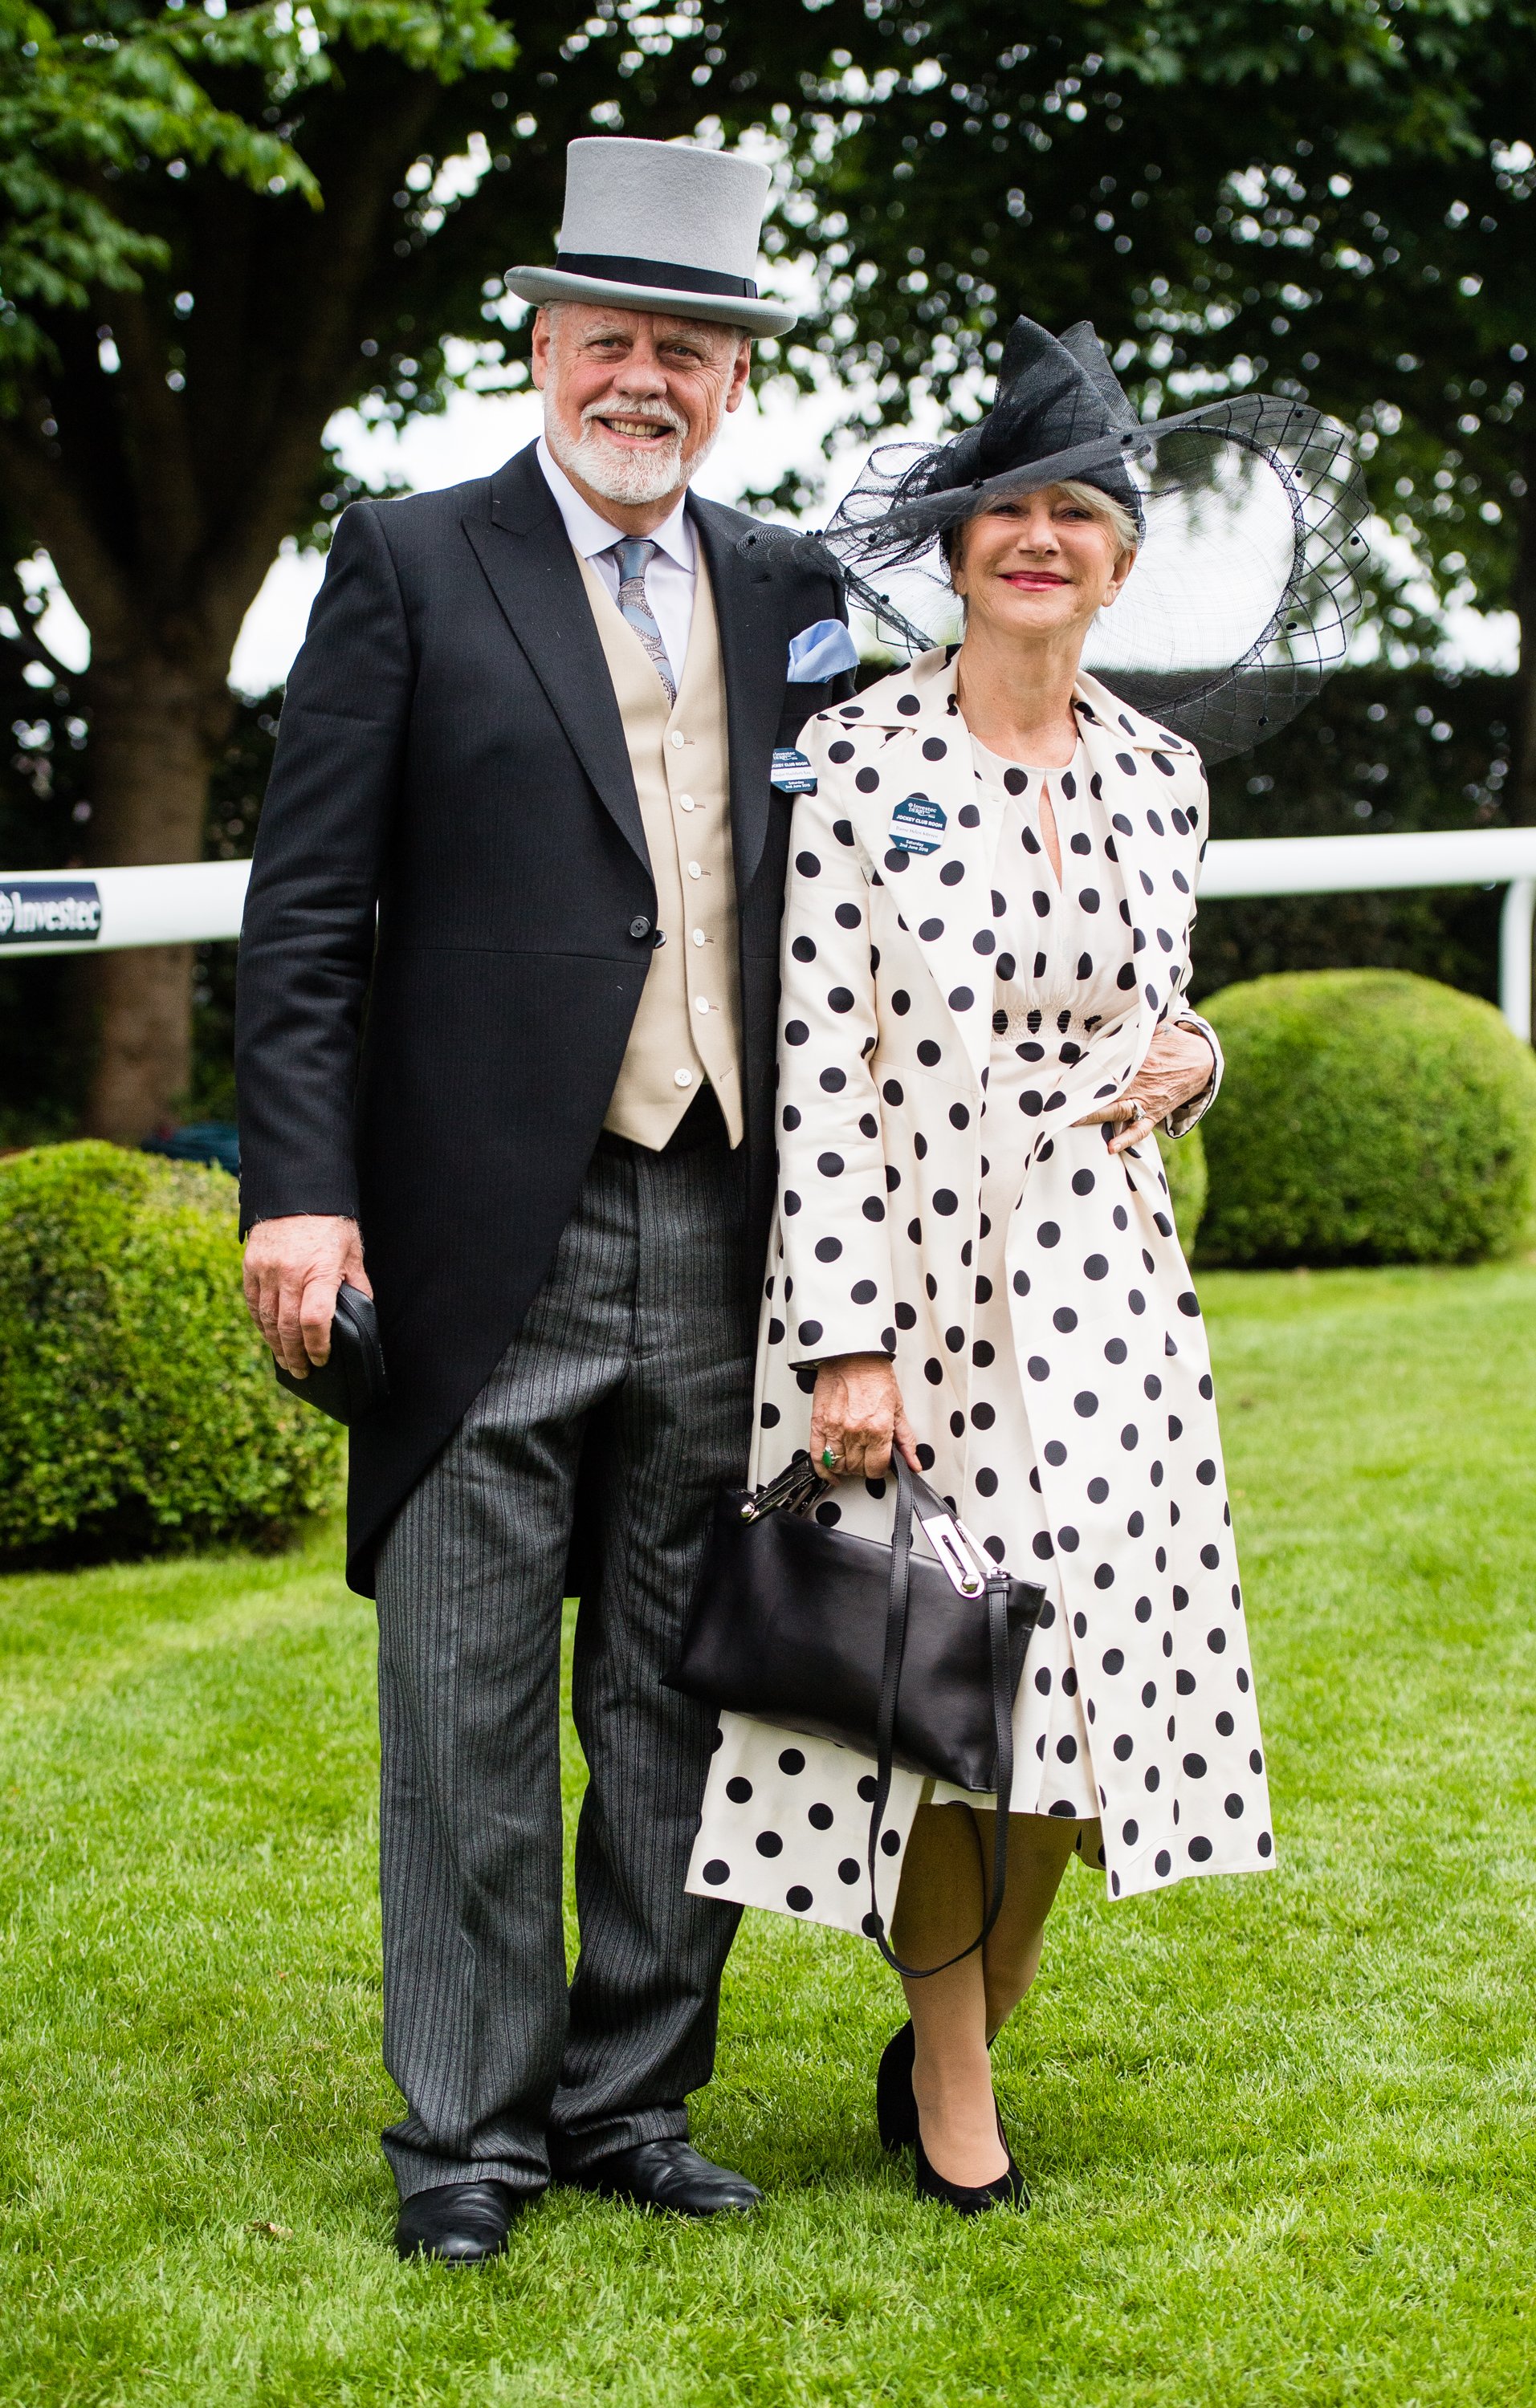 Dame Helen Mirren and Taylor Hackford at the Epsom Derby at Epsom Racecourse on June 2, 2018 in Epsom, England. | Source: Getty Images